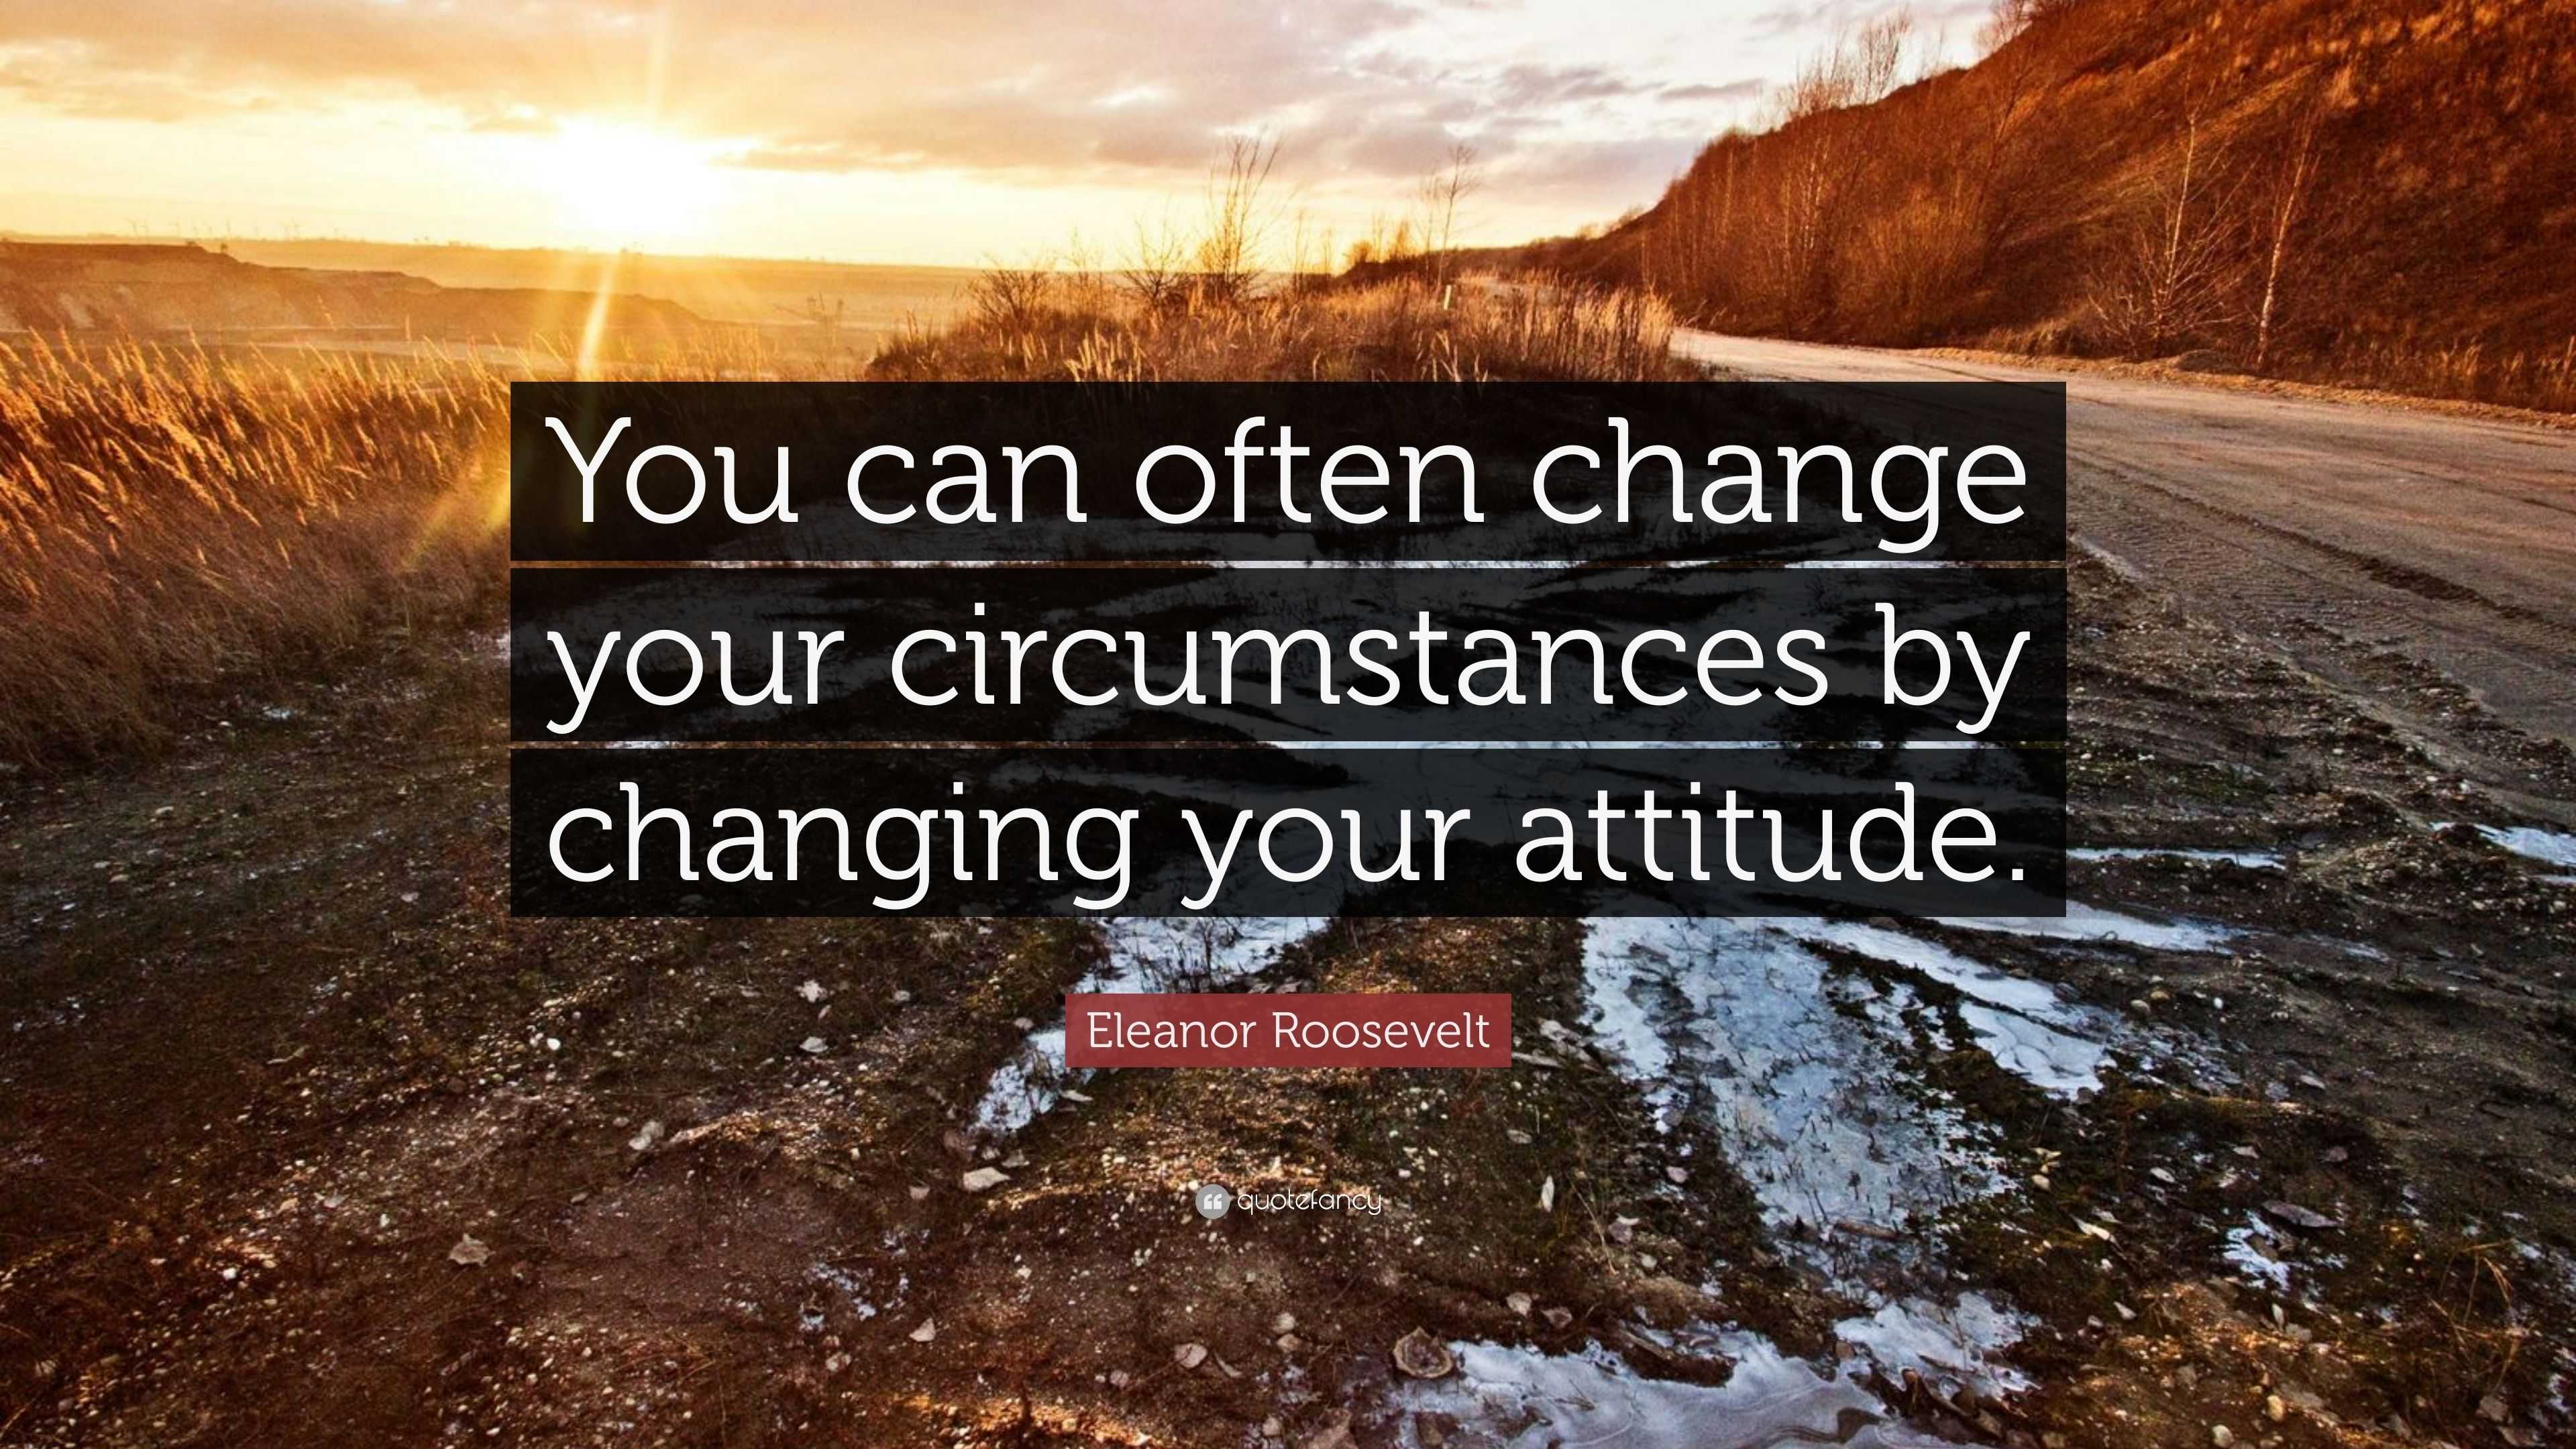 Eleanor Roosevelt Quote: “You can often change your circumstances by ...